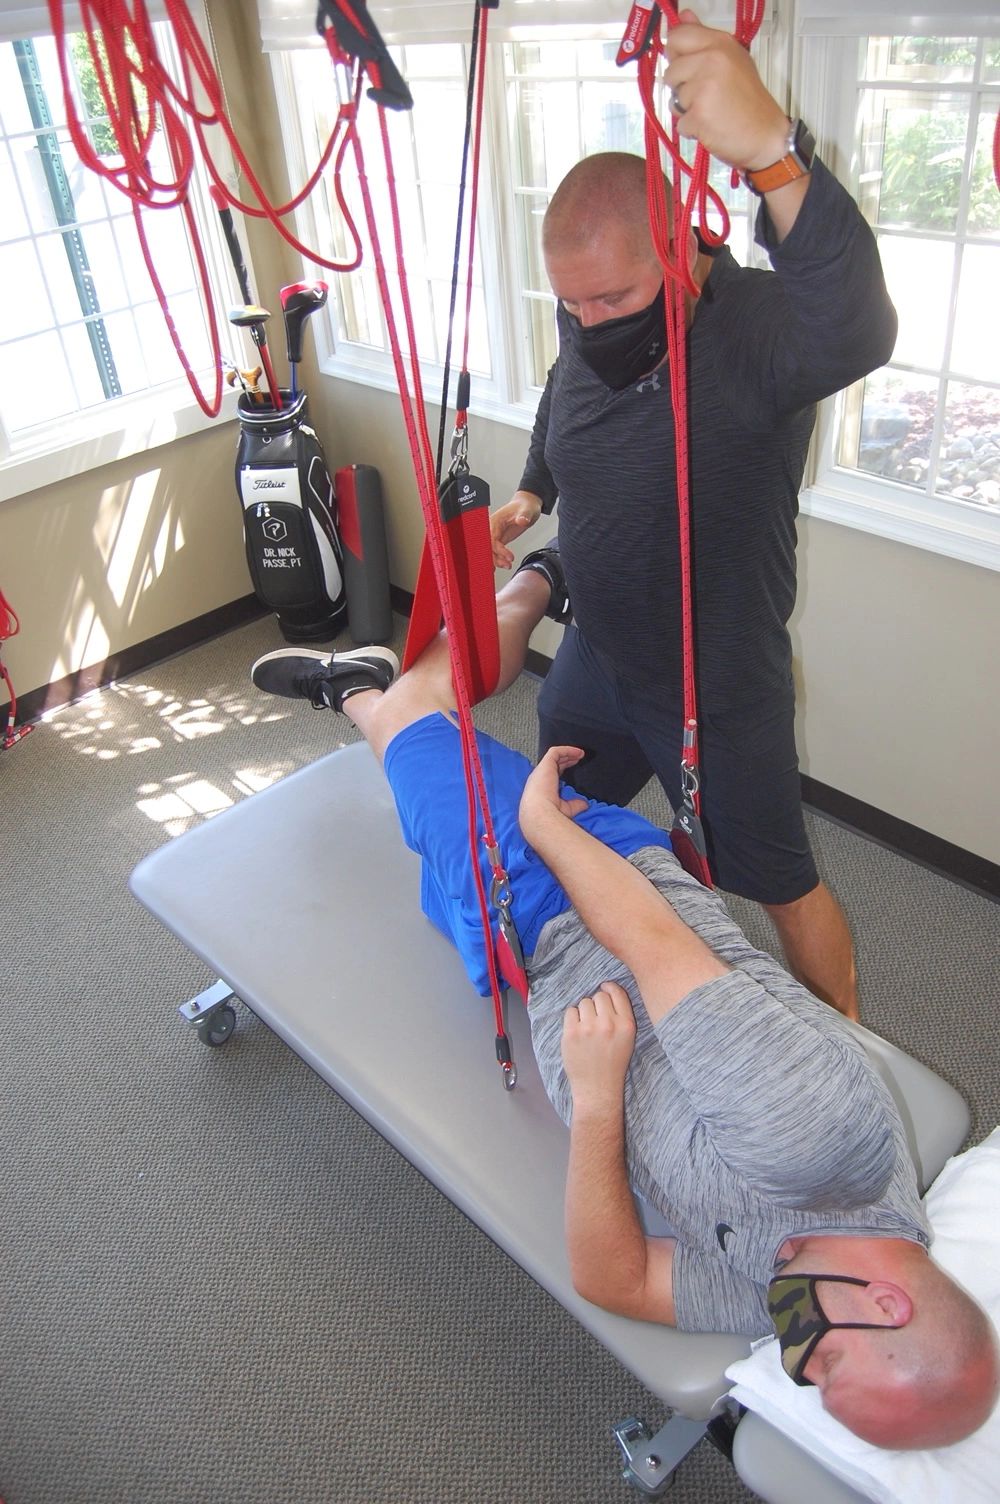 Concierge physical therapy. Redcord suspension. Pain free exercise. Functional Physical Therapy.